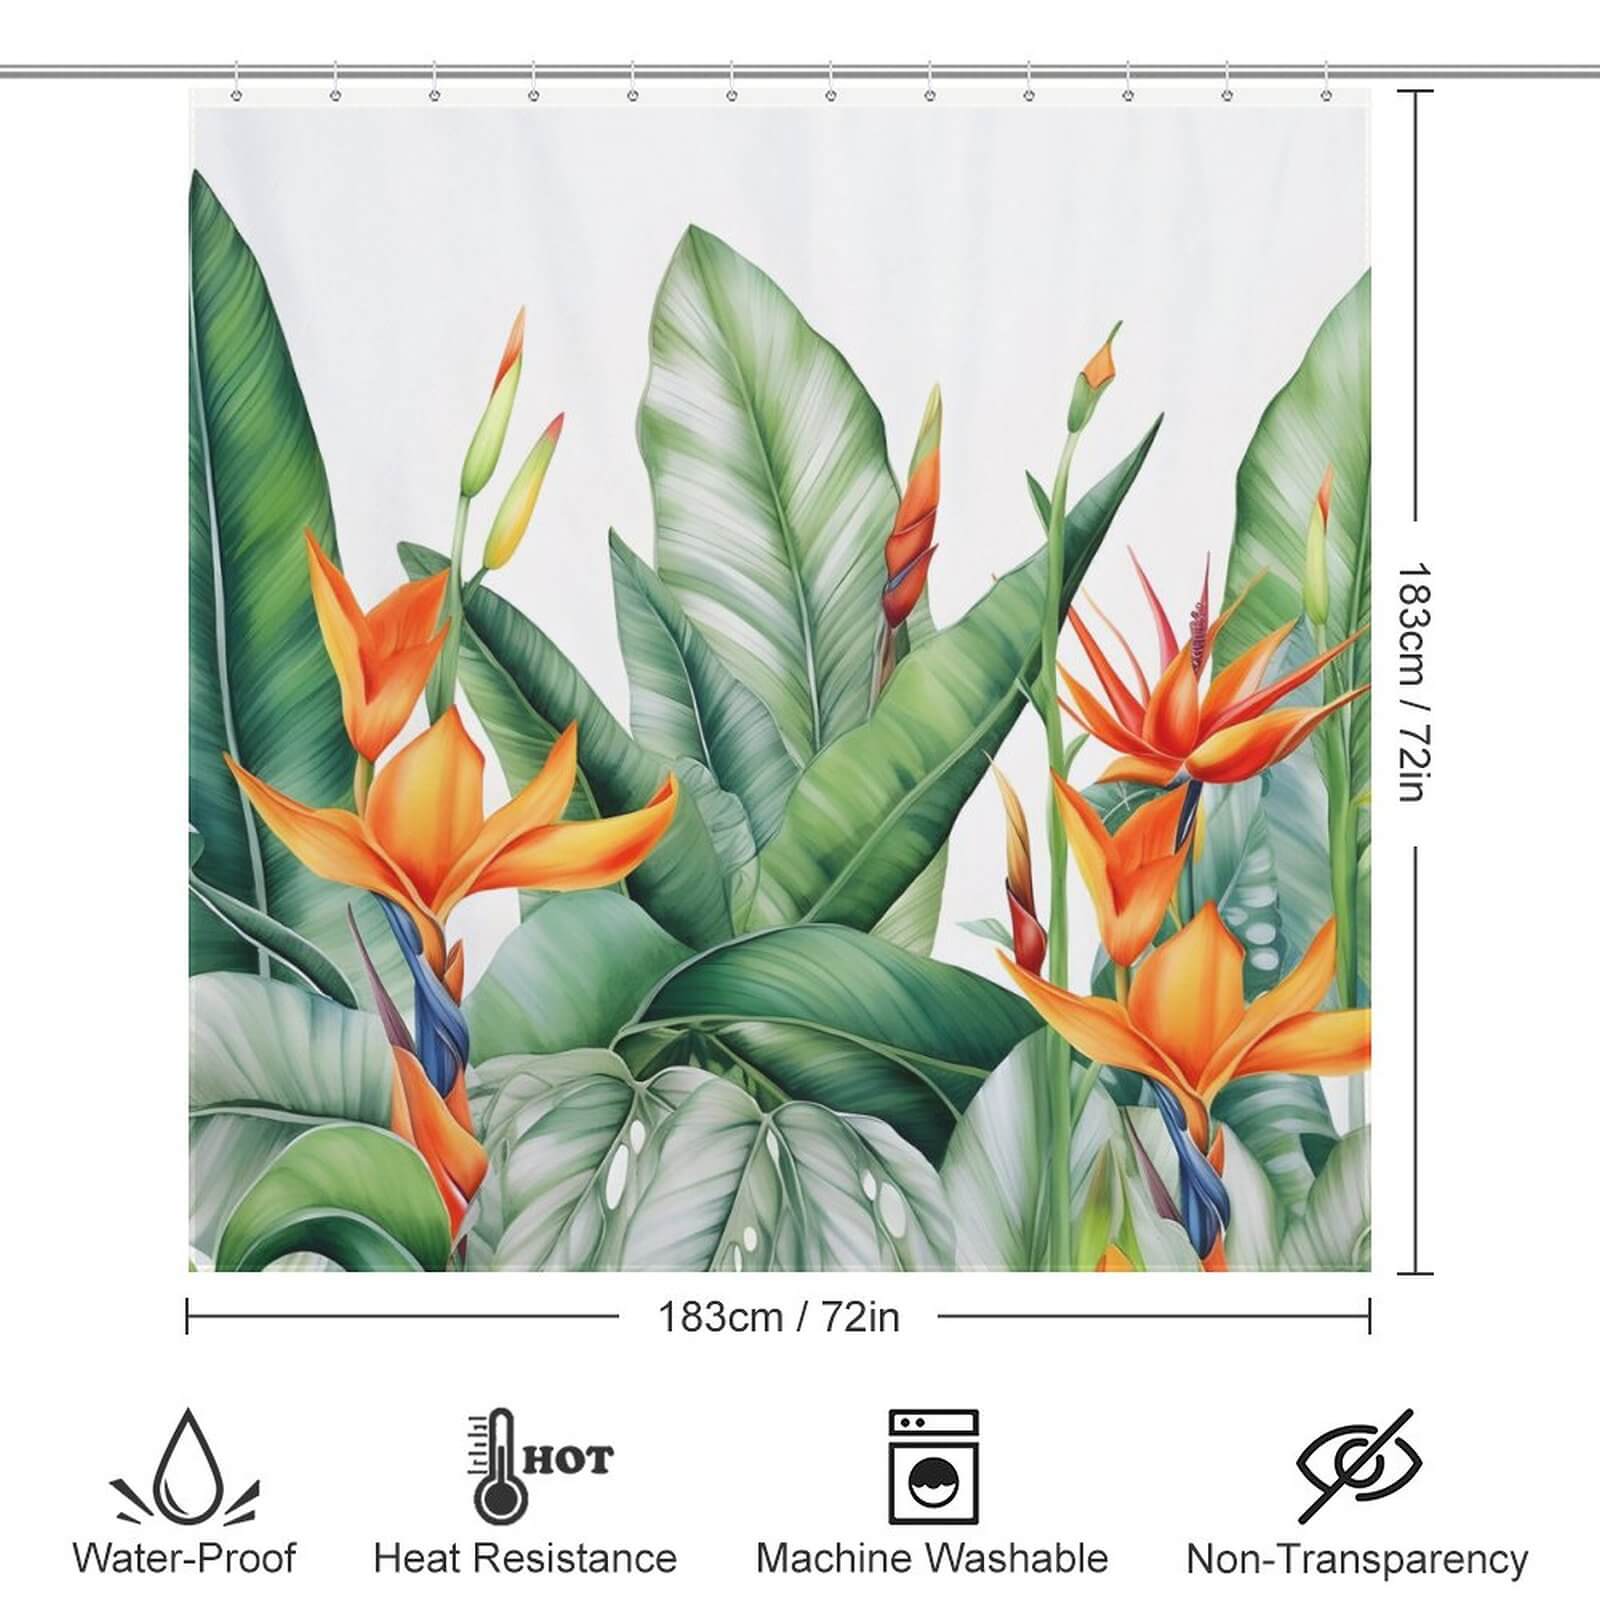 Botanical Jungle shower curtain by Cotton Cat.